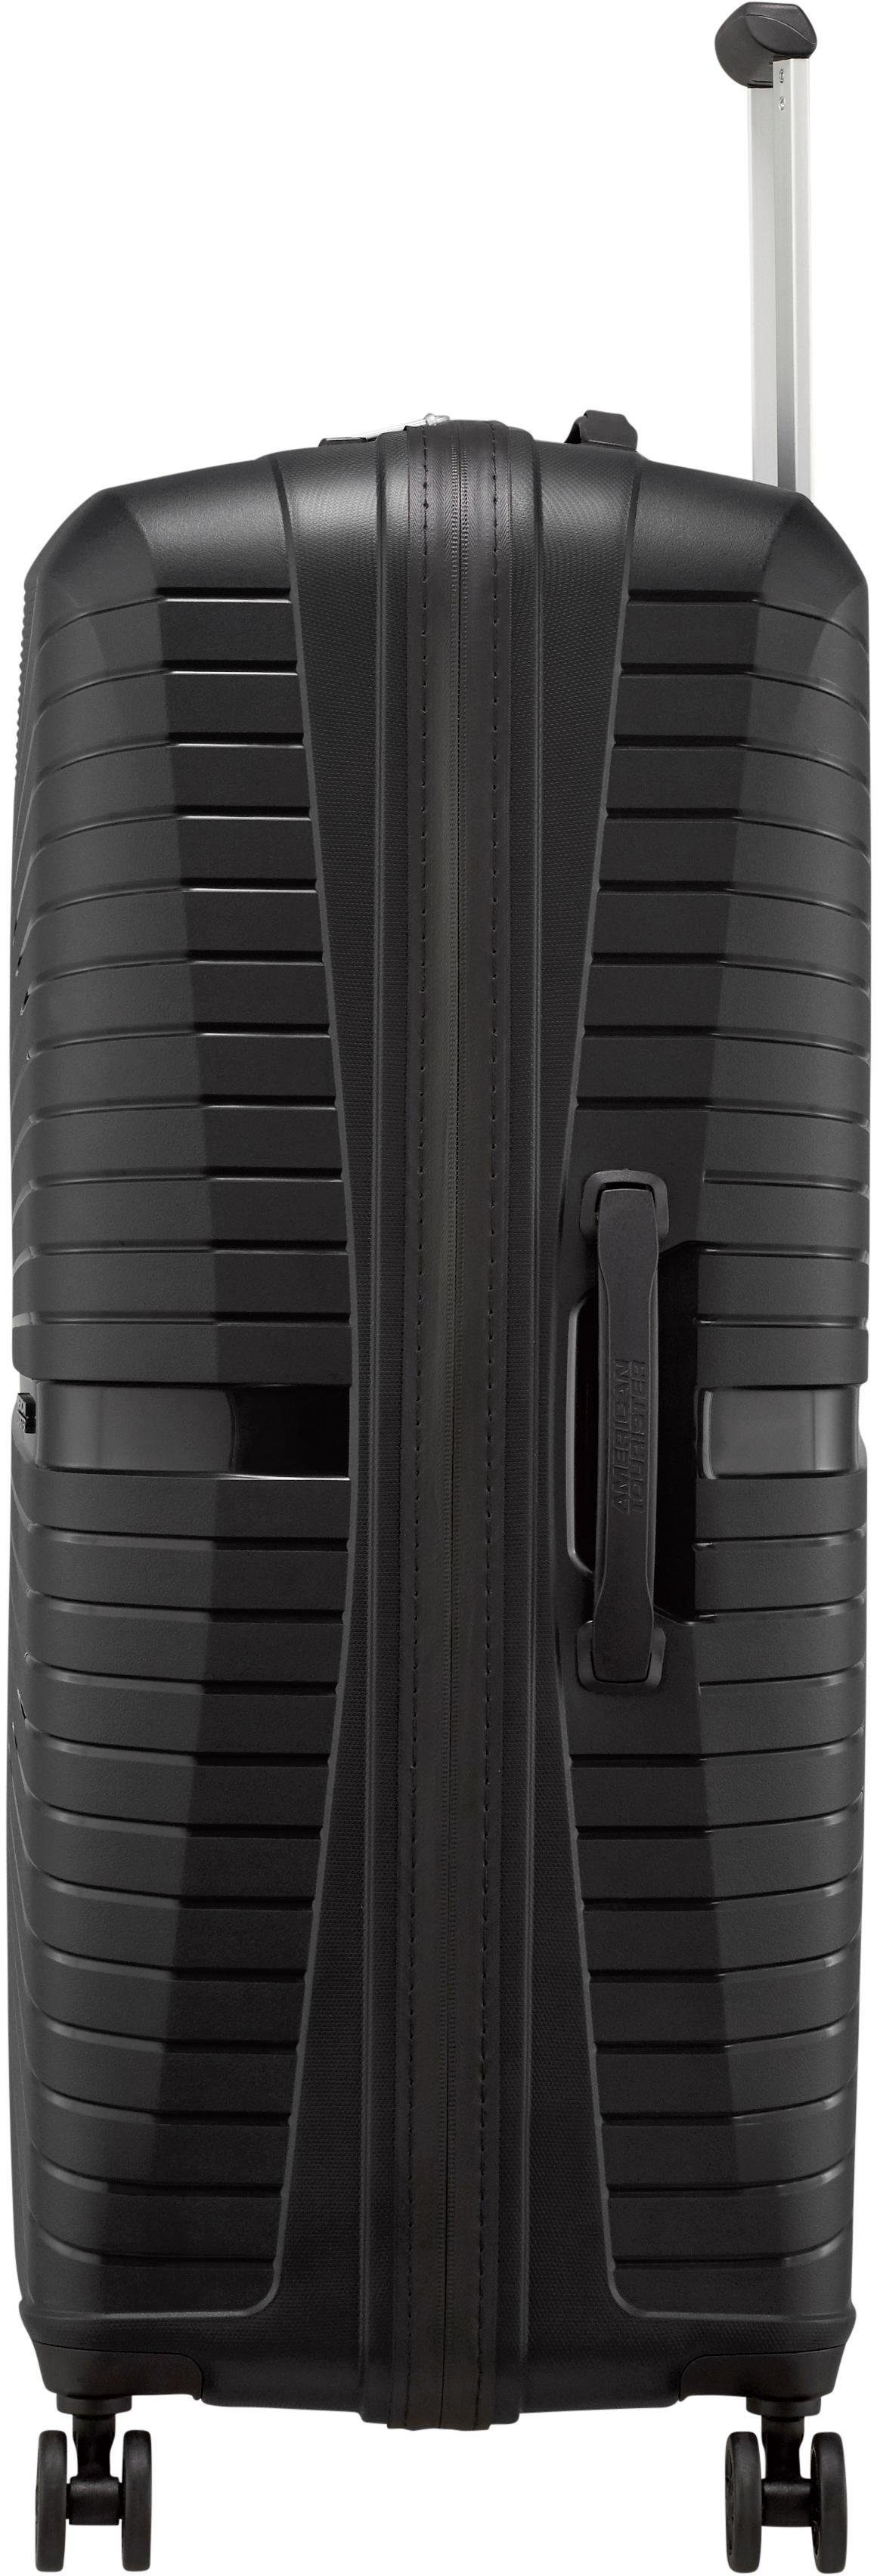 4 American Spinner Onyx Rollen 77, Black Tourister® AIRCONIC Koffer